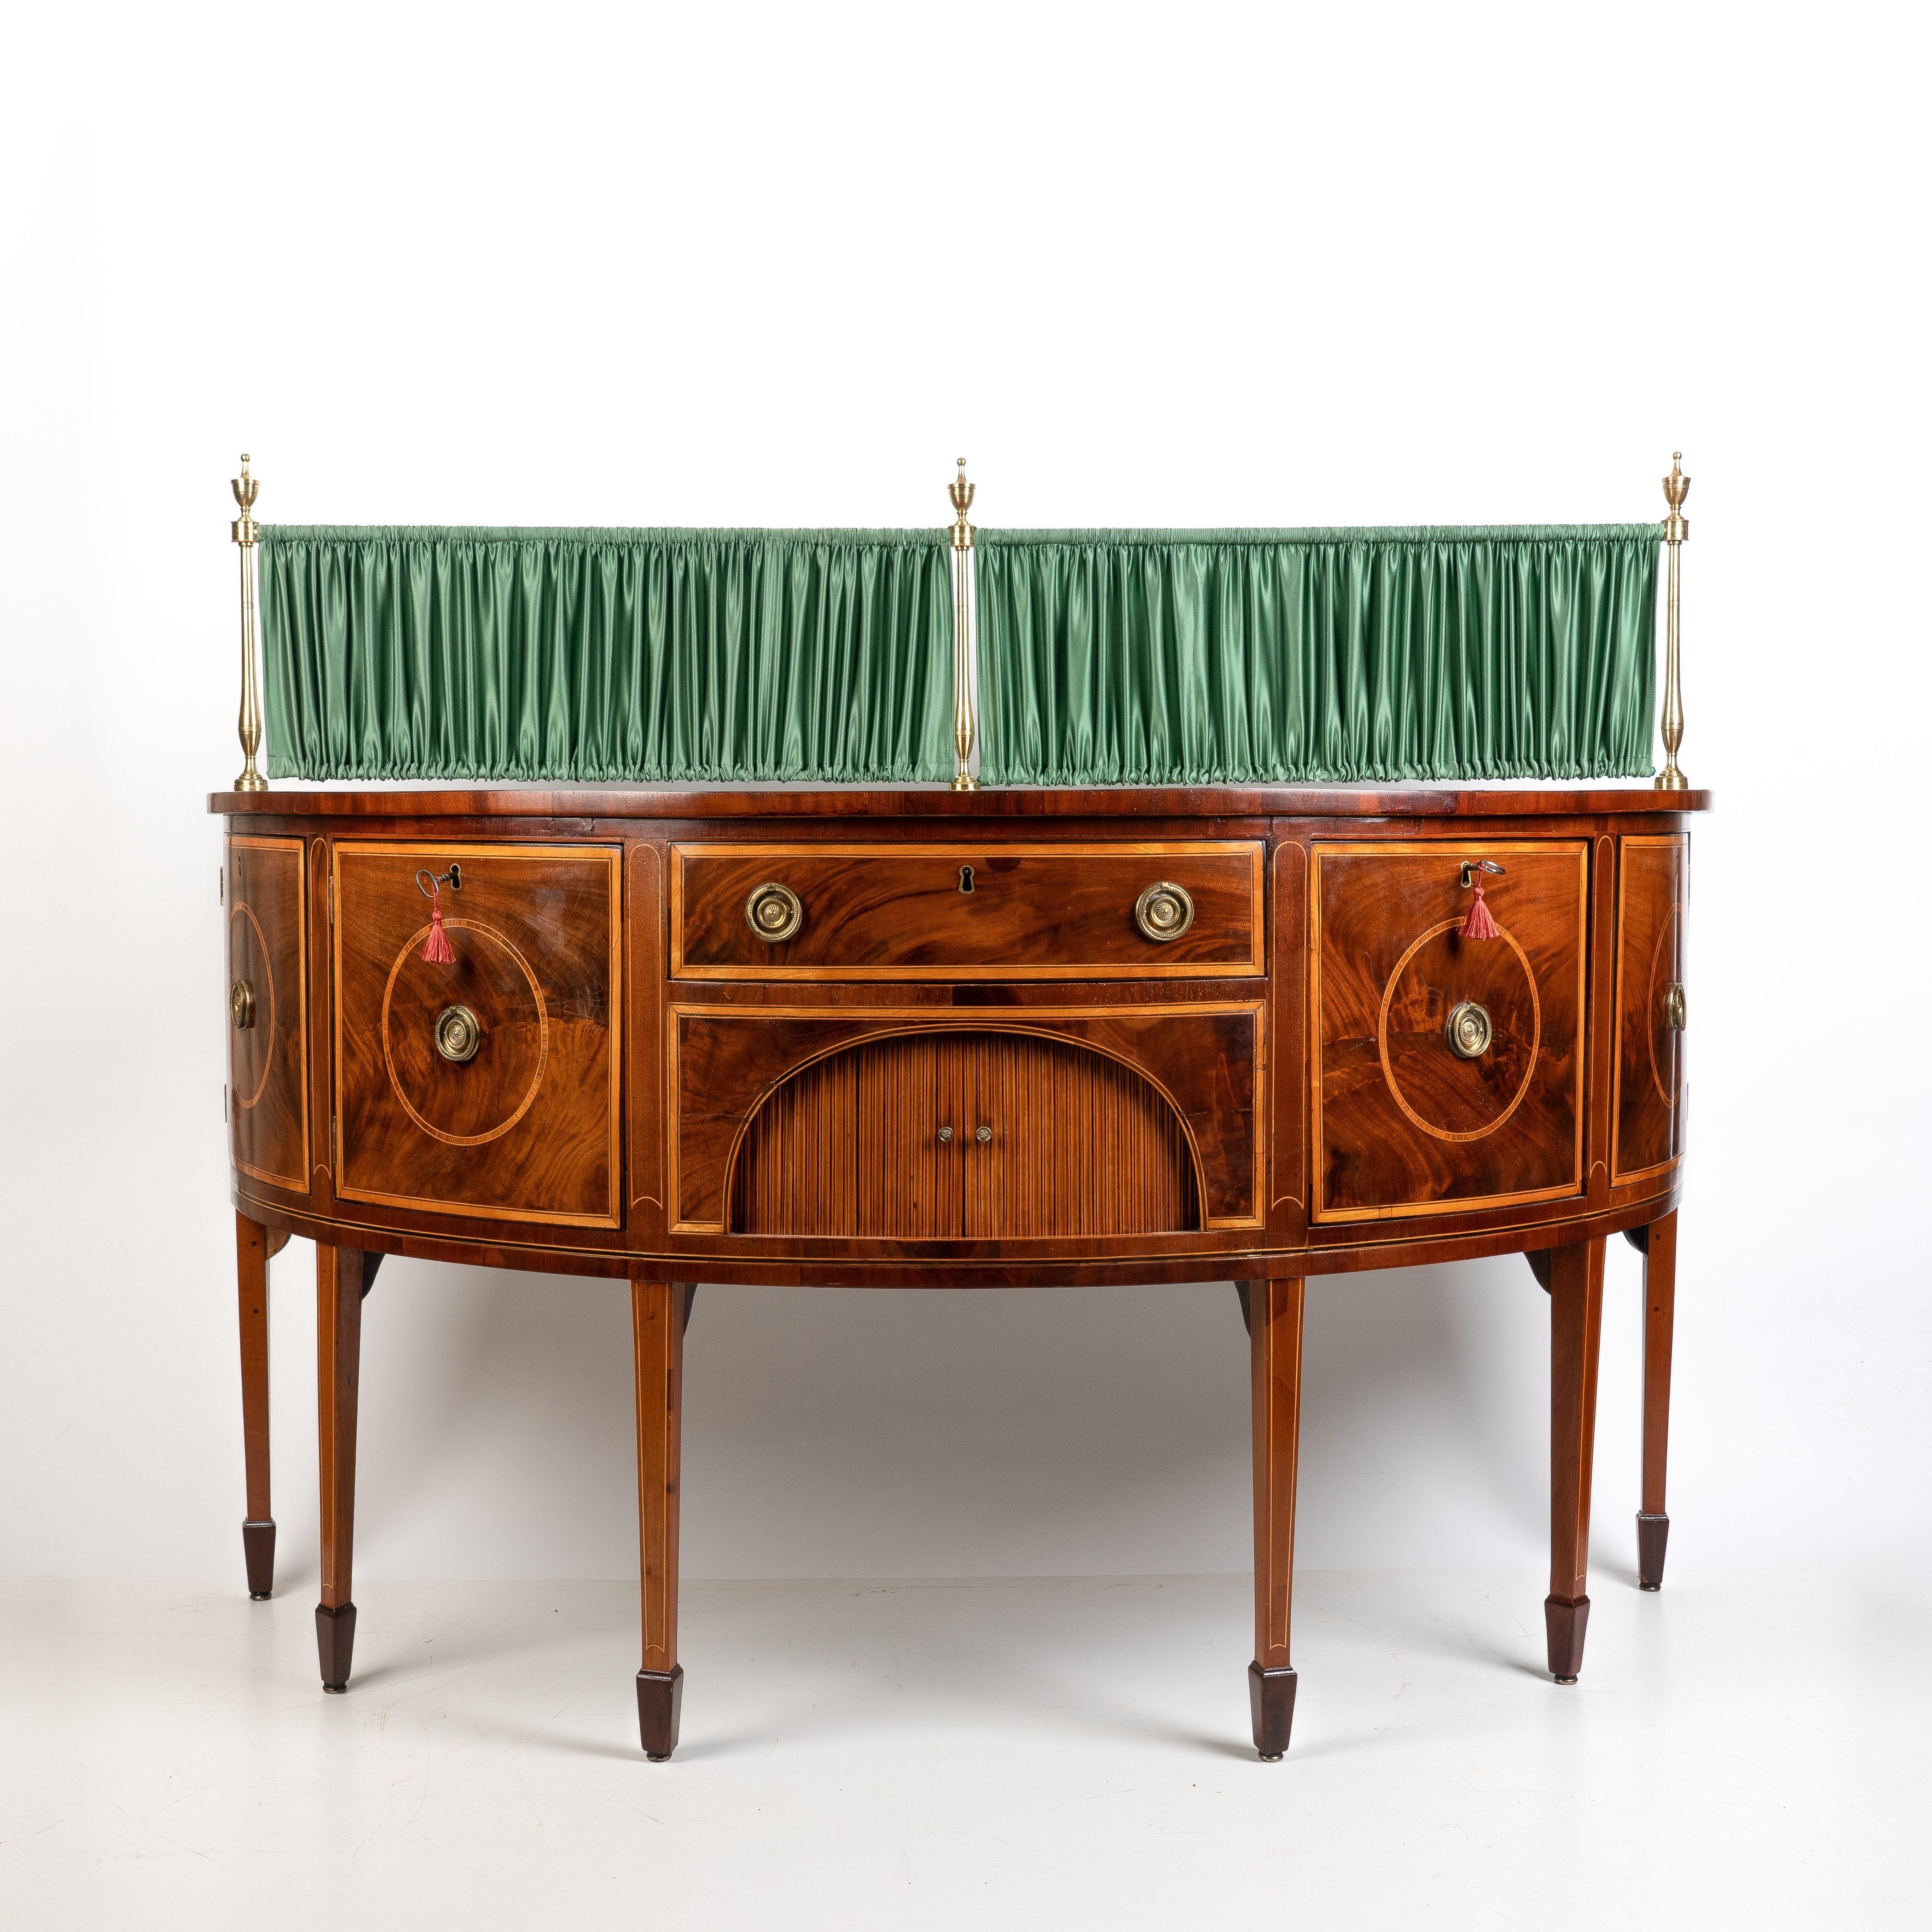 George III demi-lune sideboard with four square keyed drawer/door fronts centered on brass drop ring pulls within a circle of rosewood cross banding. The drawer/door fronts are divided in the center of the bow by a long drawer over a rectangular